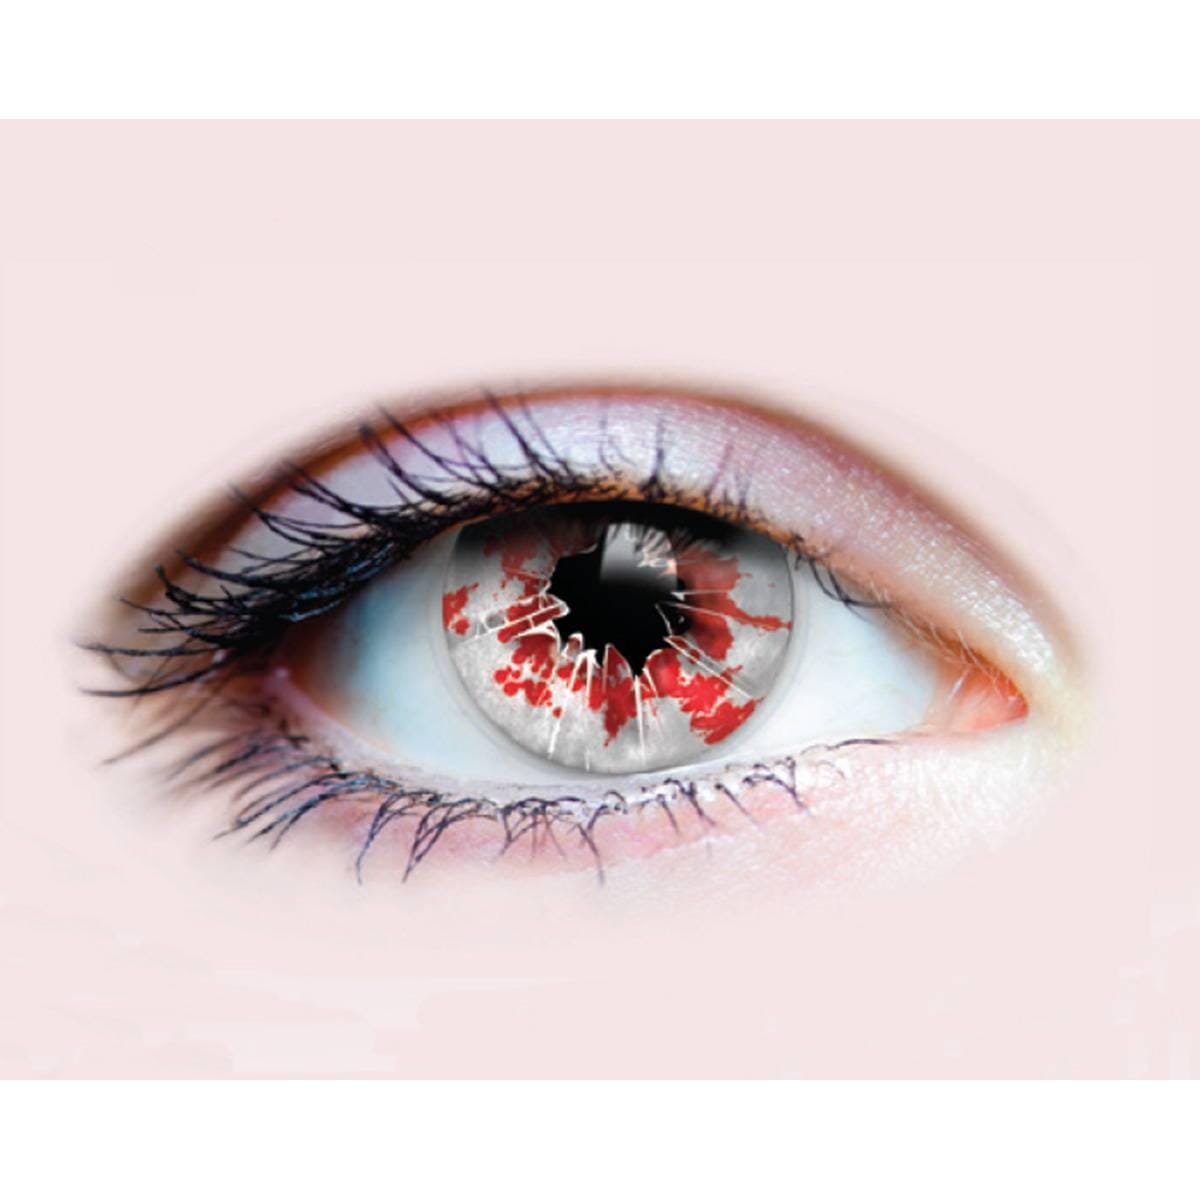 Buy Costume Accessories Shatter contact lenses, 3 months usage sold at Party Expert